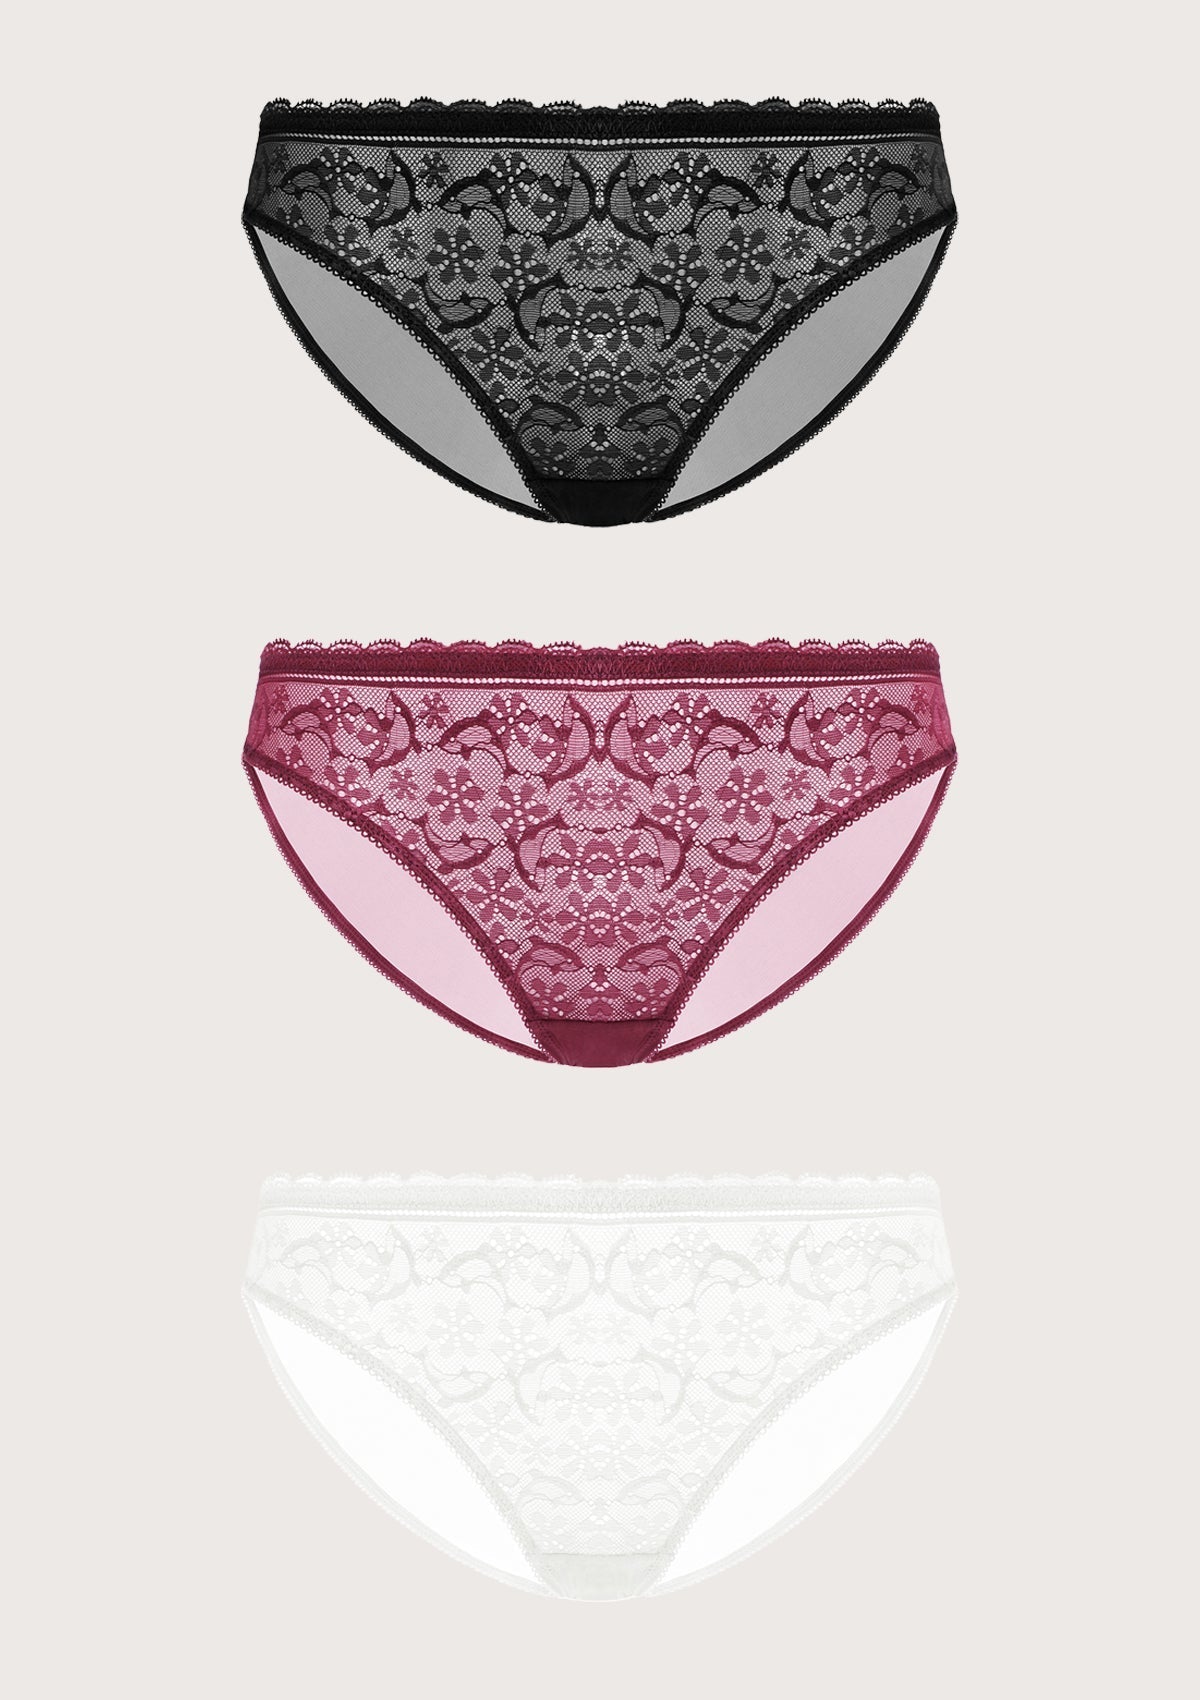 HSIA Anemone Lace Dolphin-Patterned Front And Mesh Back Panties-3 Pack - L / Black+Burgundy+White